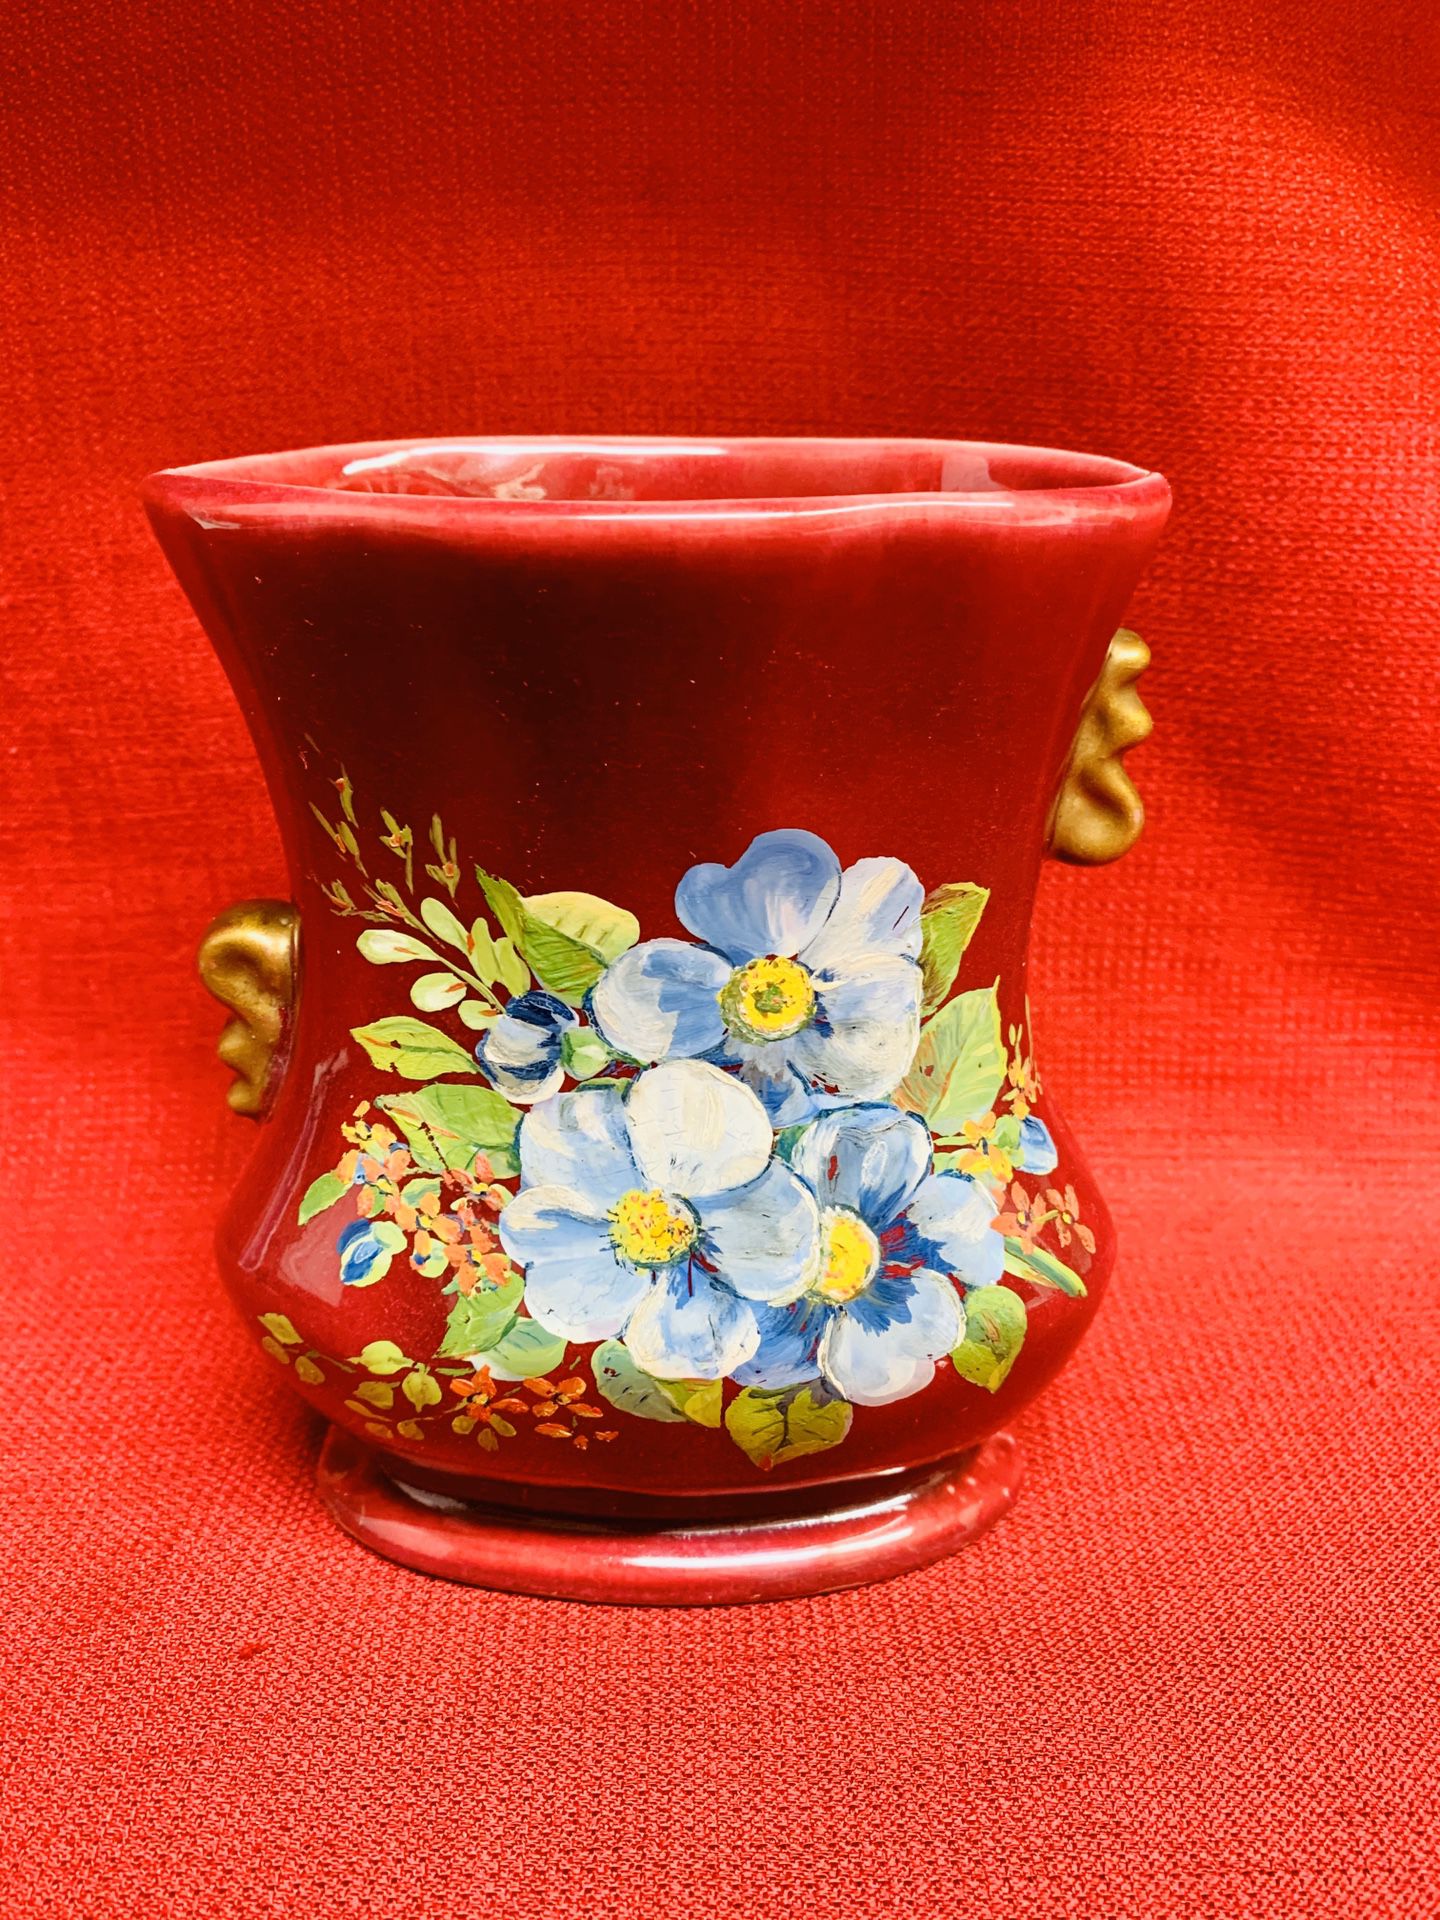 Red Glazed Hand Painted Floral Design Ceramic Vase Pot Planter 5”x 3 1/4”x 6 1/2”tall USA